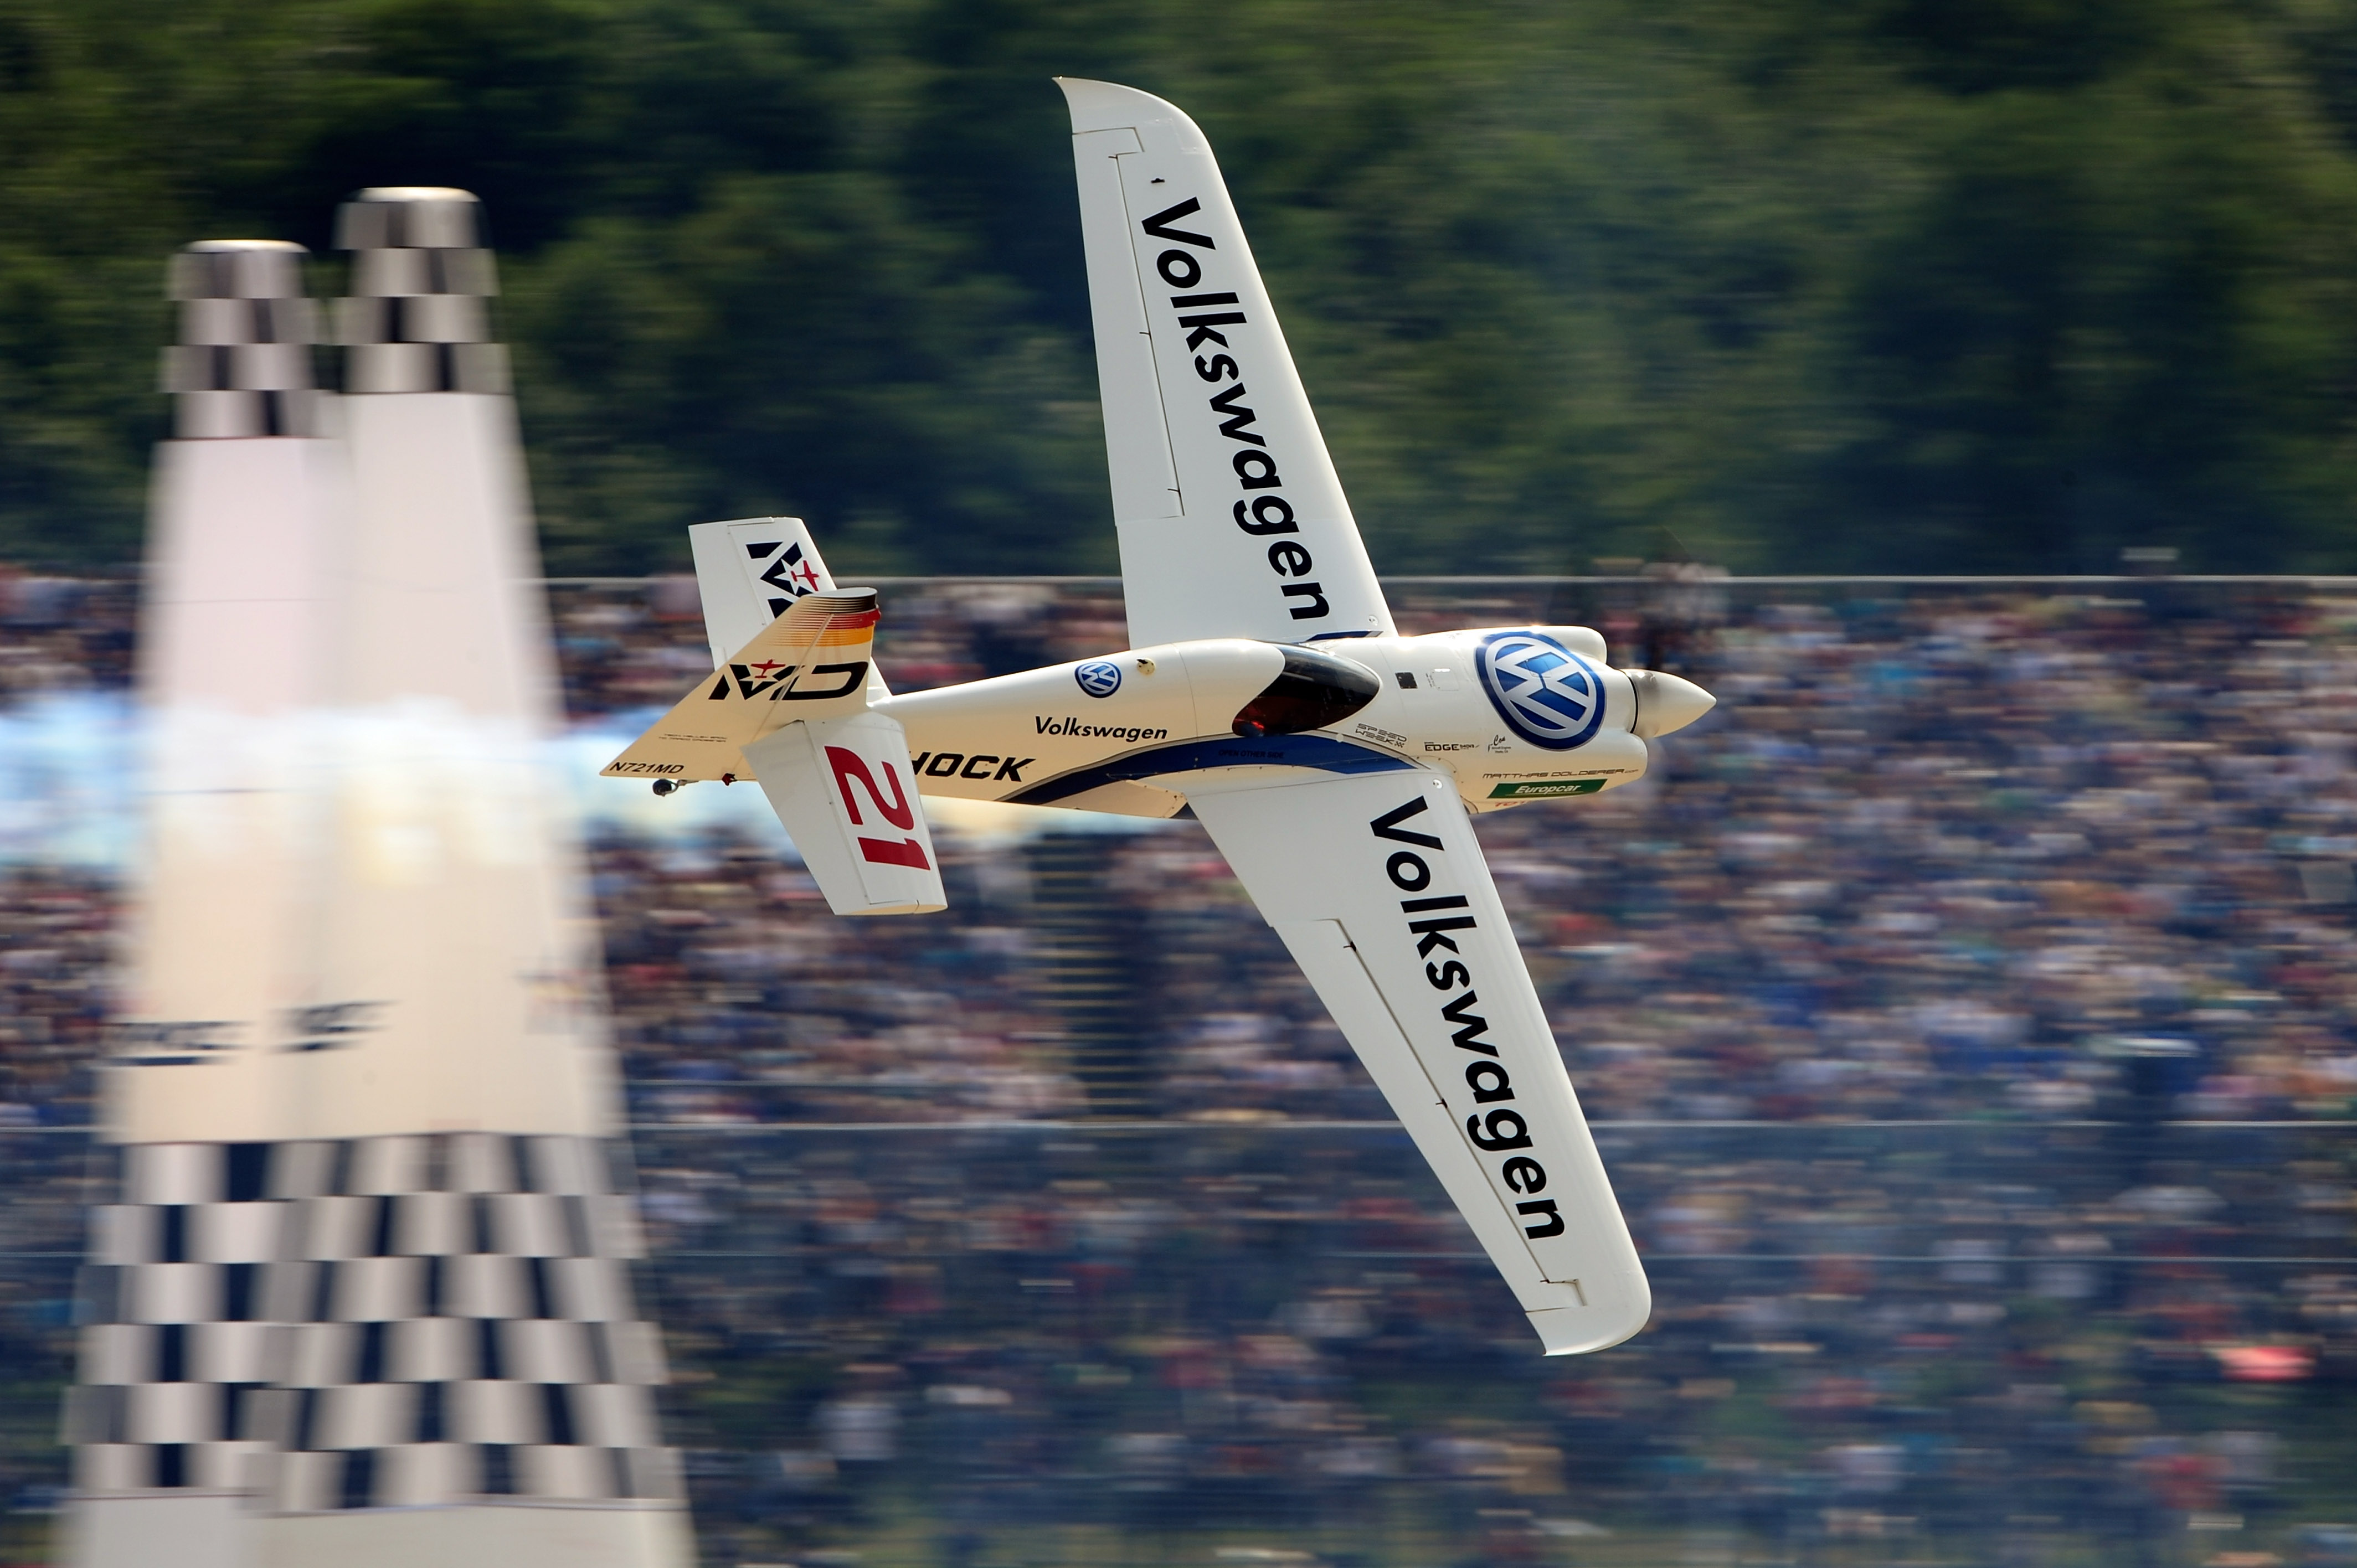 red bull air race, Airplane, Plane, Race, Racing, Red, Bull, Aircraft, Kr Wallpaper